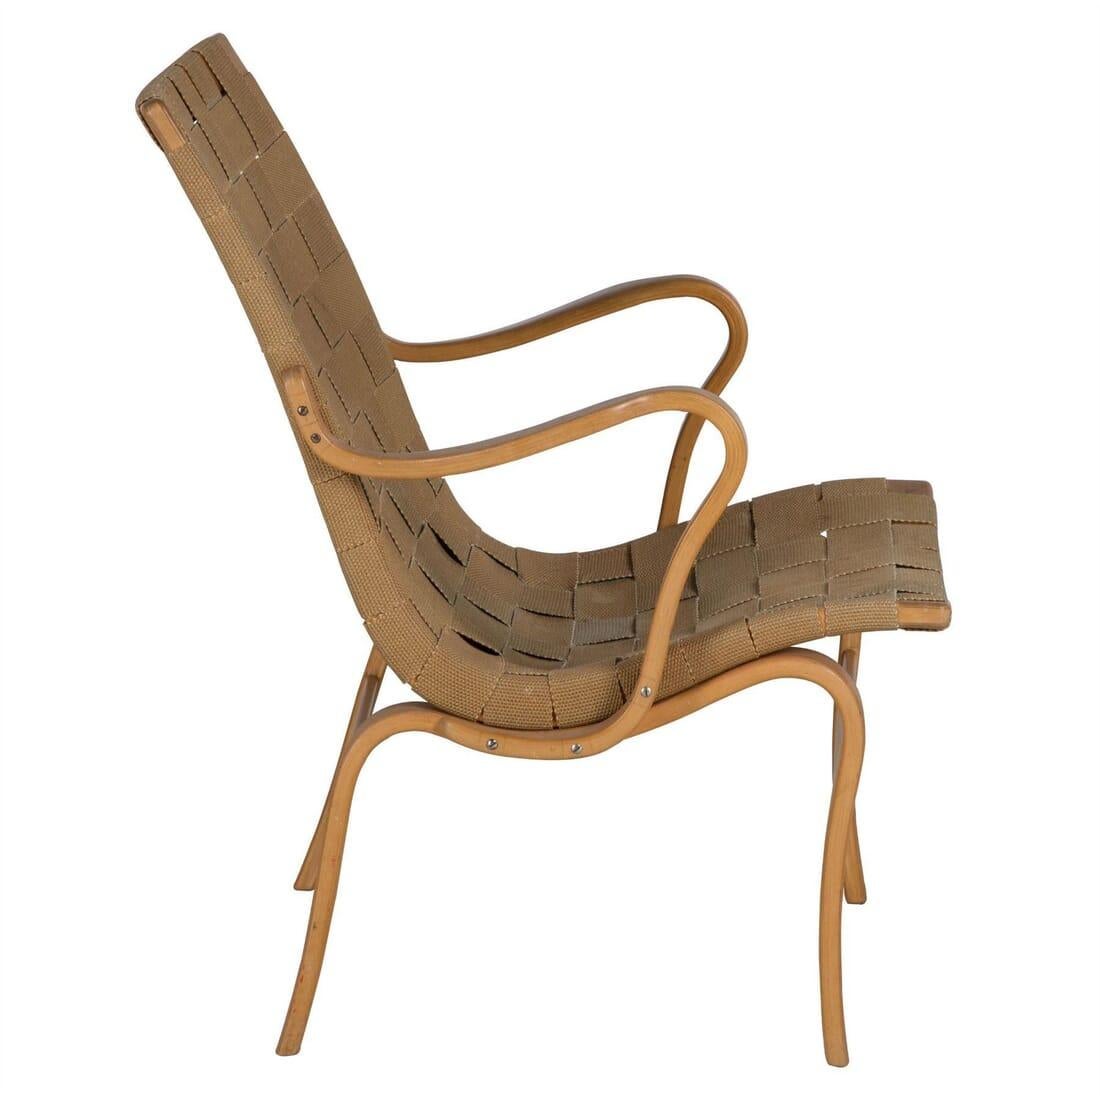 An early 'Eva' by Bruno Mathsson, signed Karl Mathsson. Circa 1940's. A design classic.

Bruno Mathsson was a Swedish furniture designer whose ideas aligned with functionalism, modernism, as well as traditional crafts. He began working in his